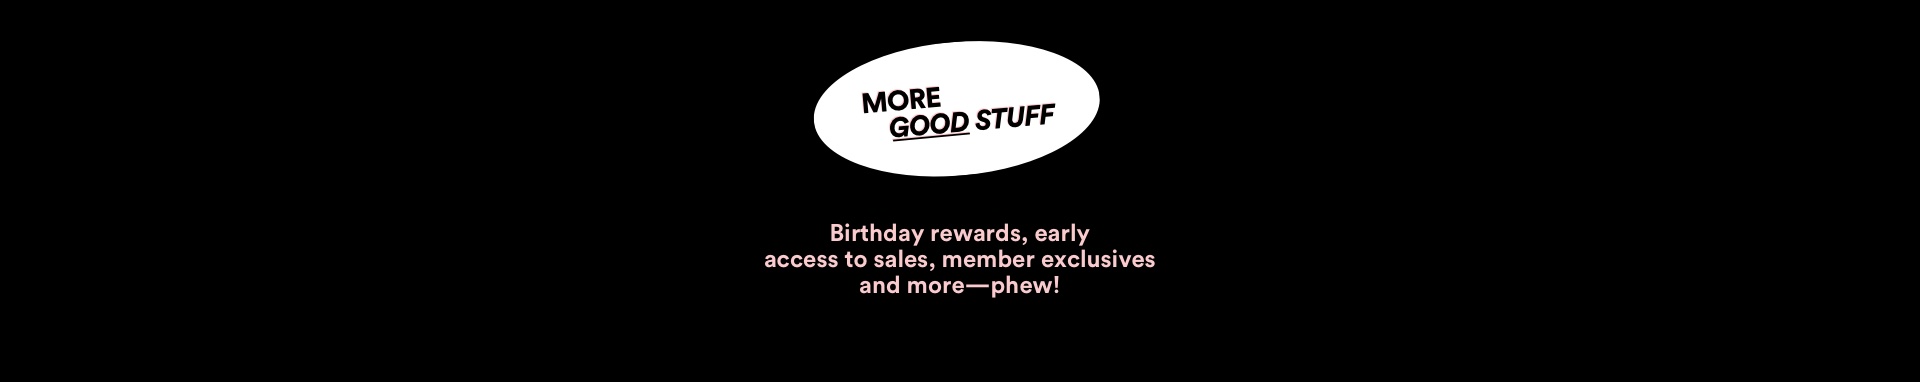 Perks on the App. More good stuff: birthday rewards, sale early access and more.